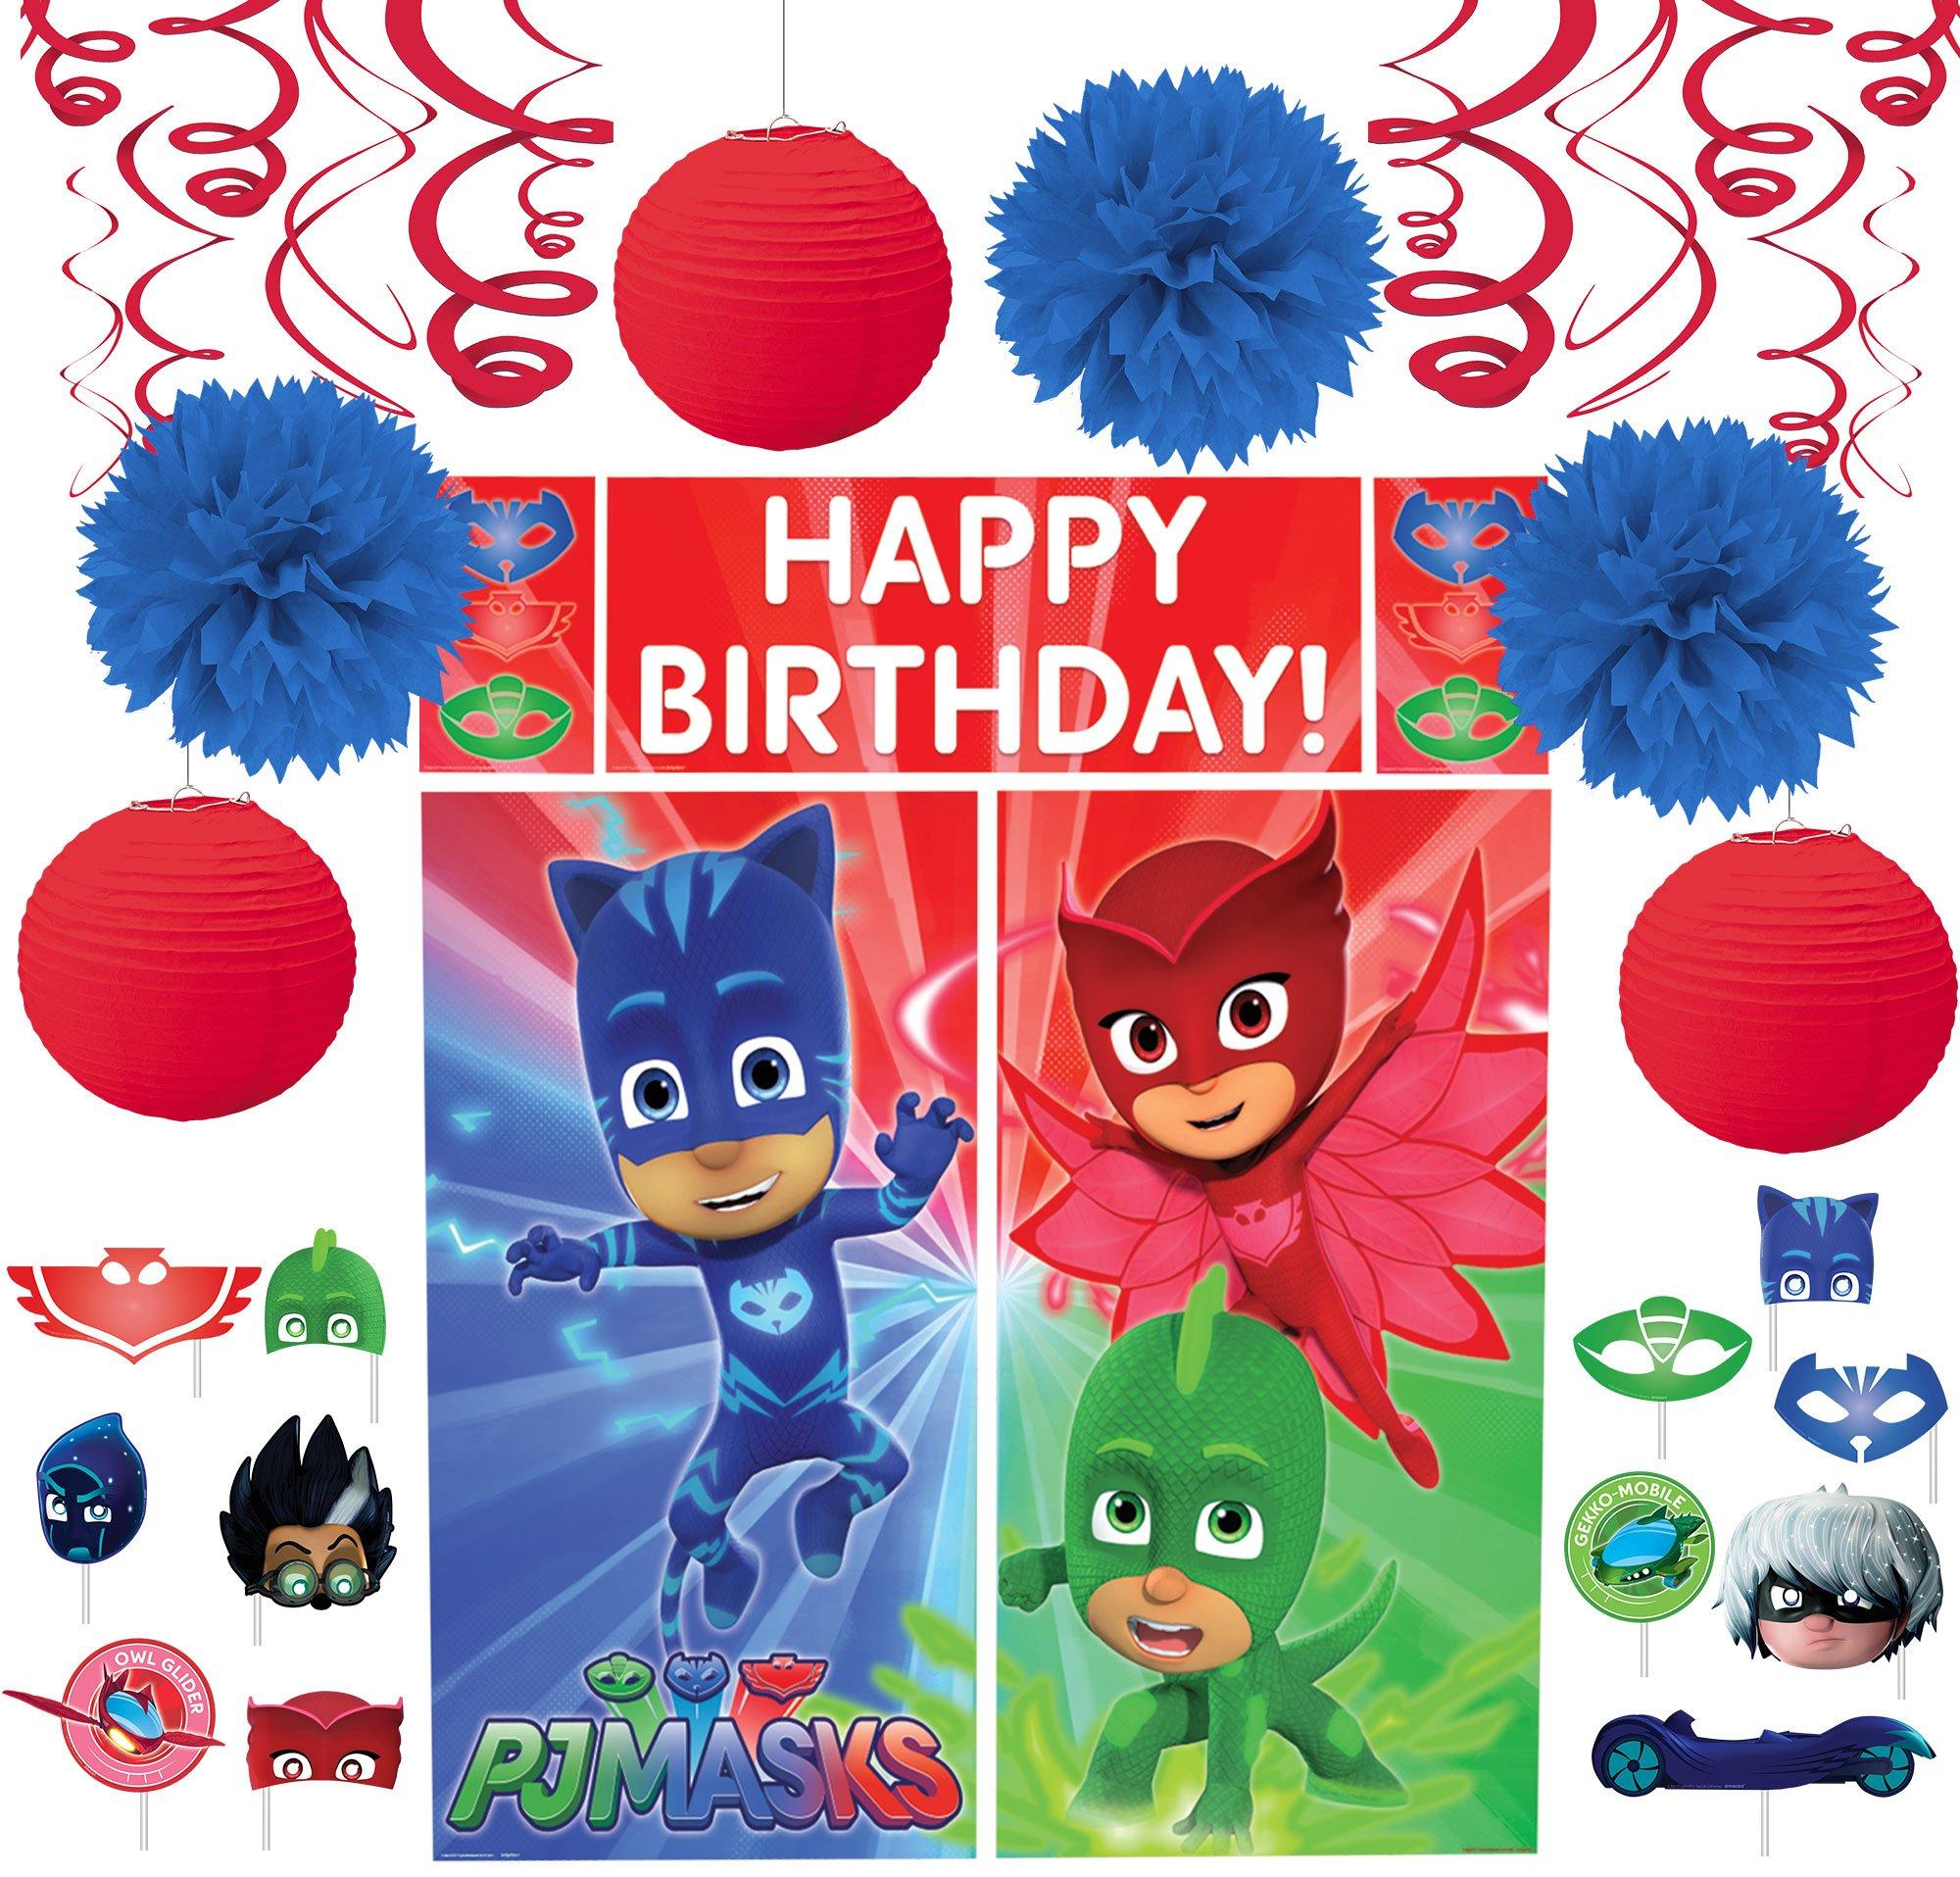 PJ Masks Party Decorating Supplies Pack - Kit Includes Paper Lantern Decorations, Swirls, Scene Setter, Photo Booth Props & Tissue Pom Poms